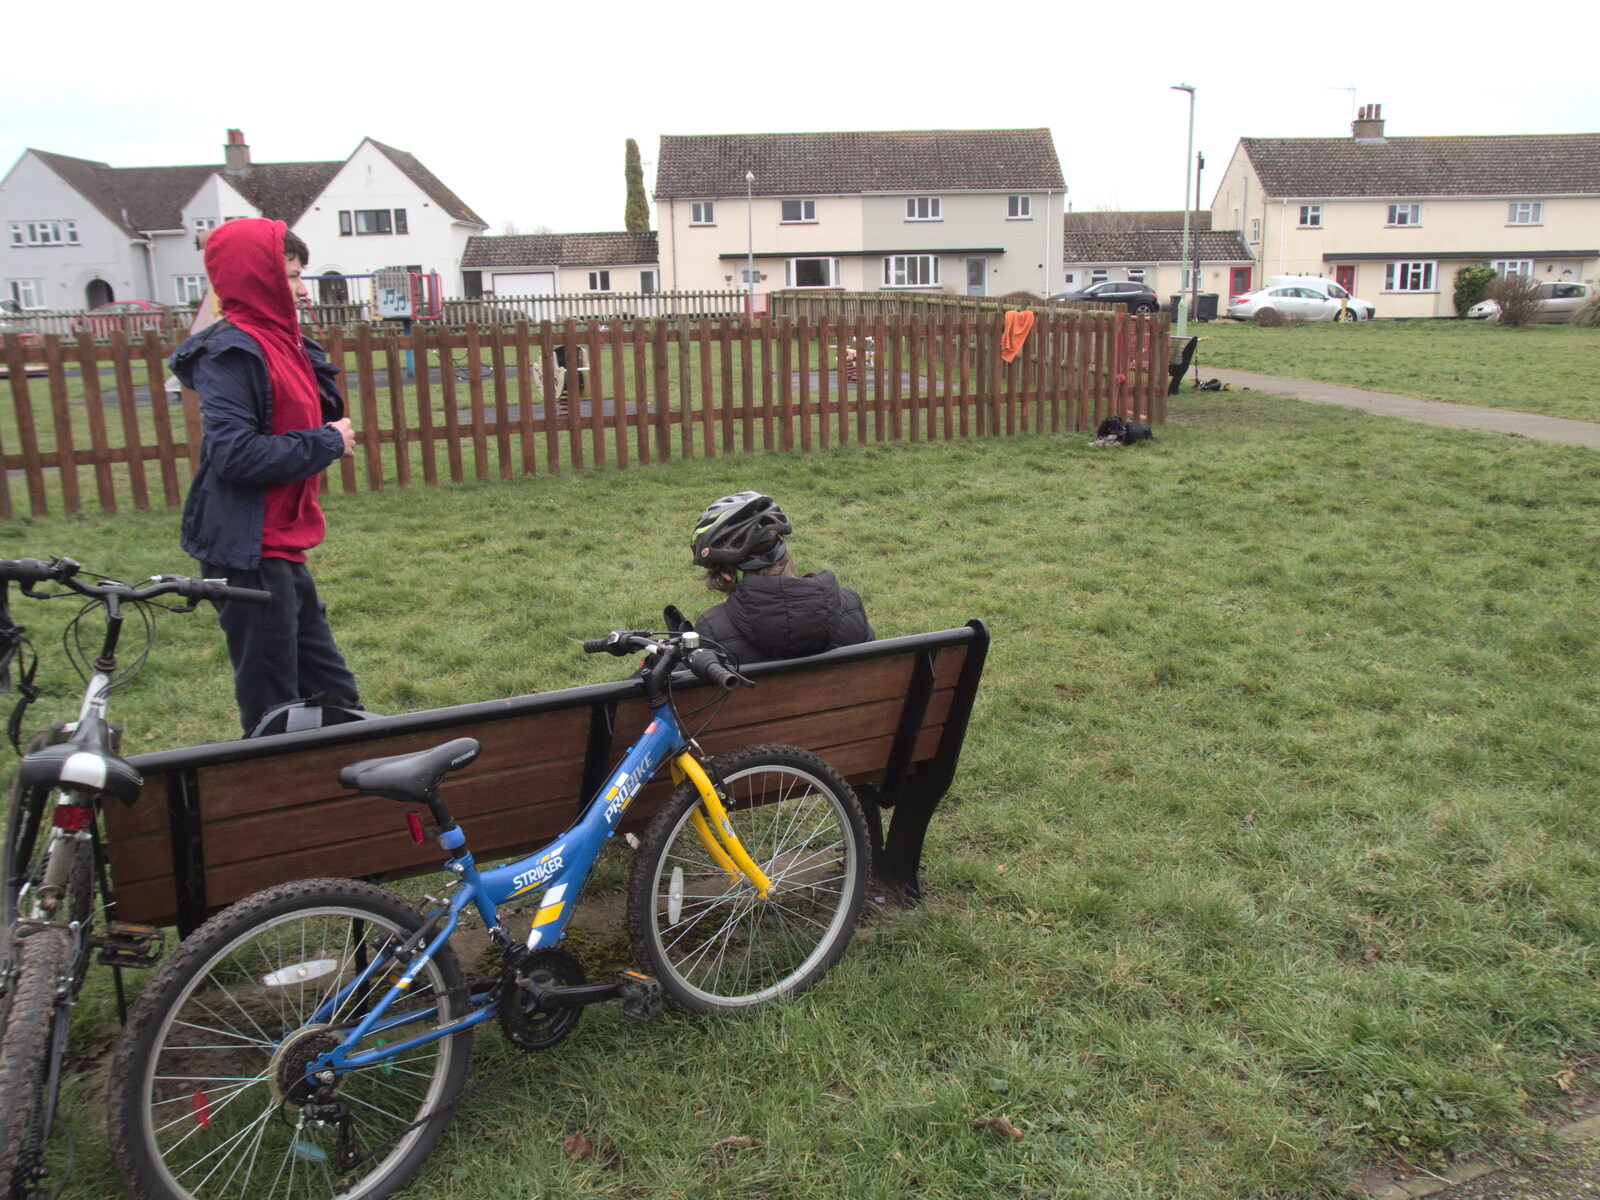 Hanging around with bikes from The Old Sewage Works, The Avenue, Brome, Suffolk - 20th February 2021